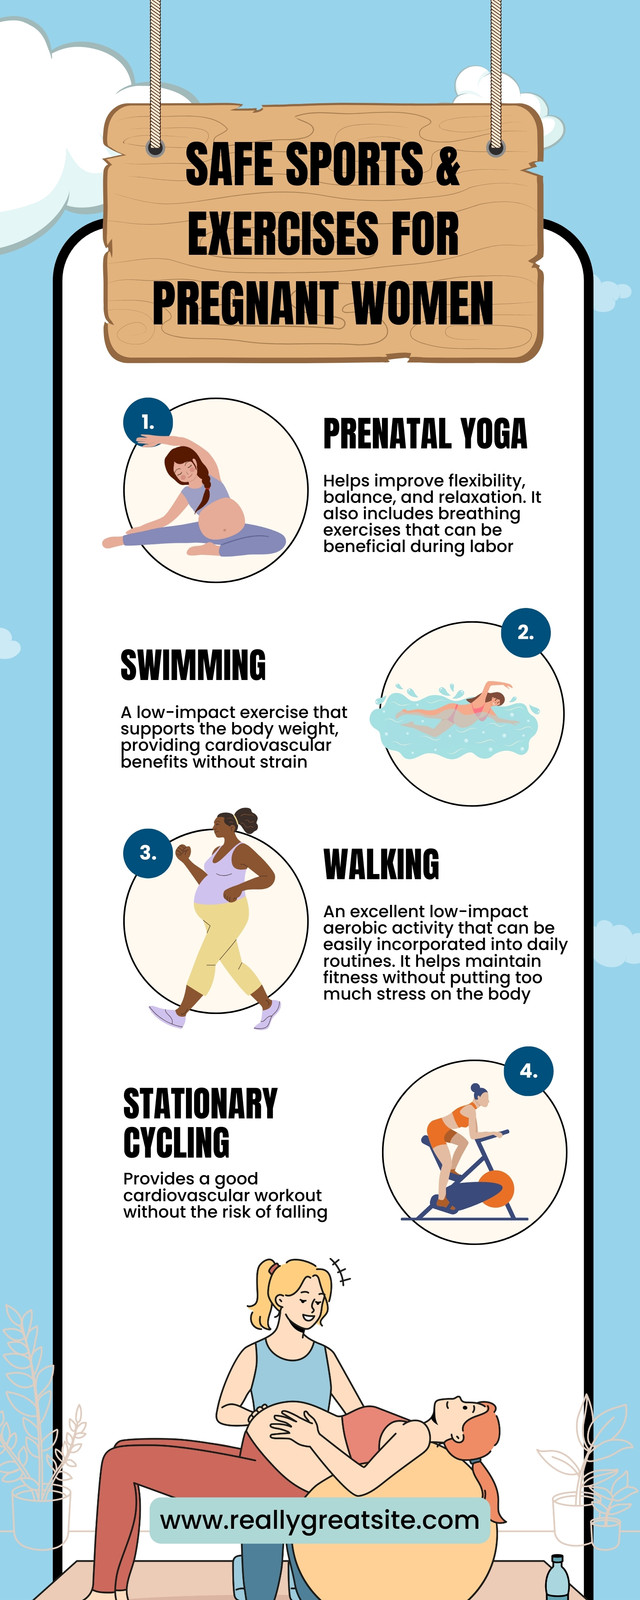 Get Fit Without Weights: Bodyweight Exercises [Chart] [Infographic